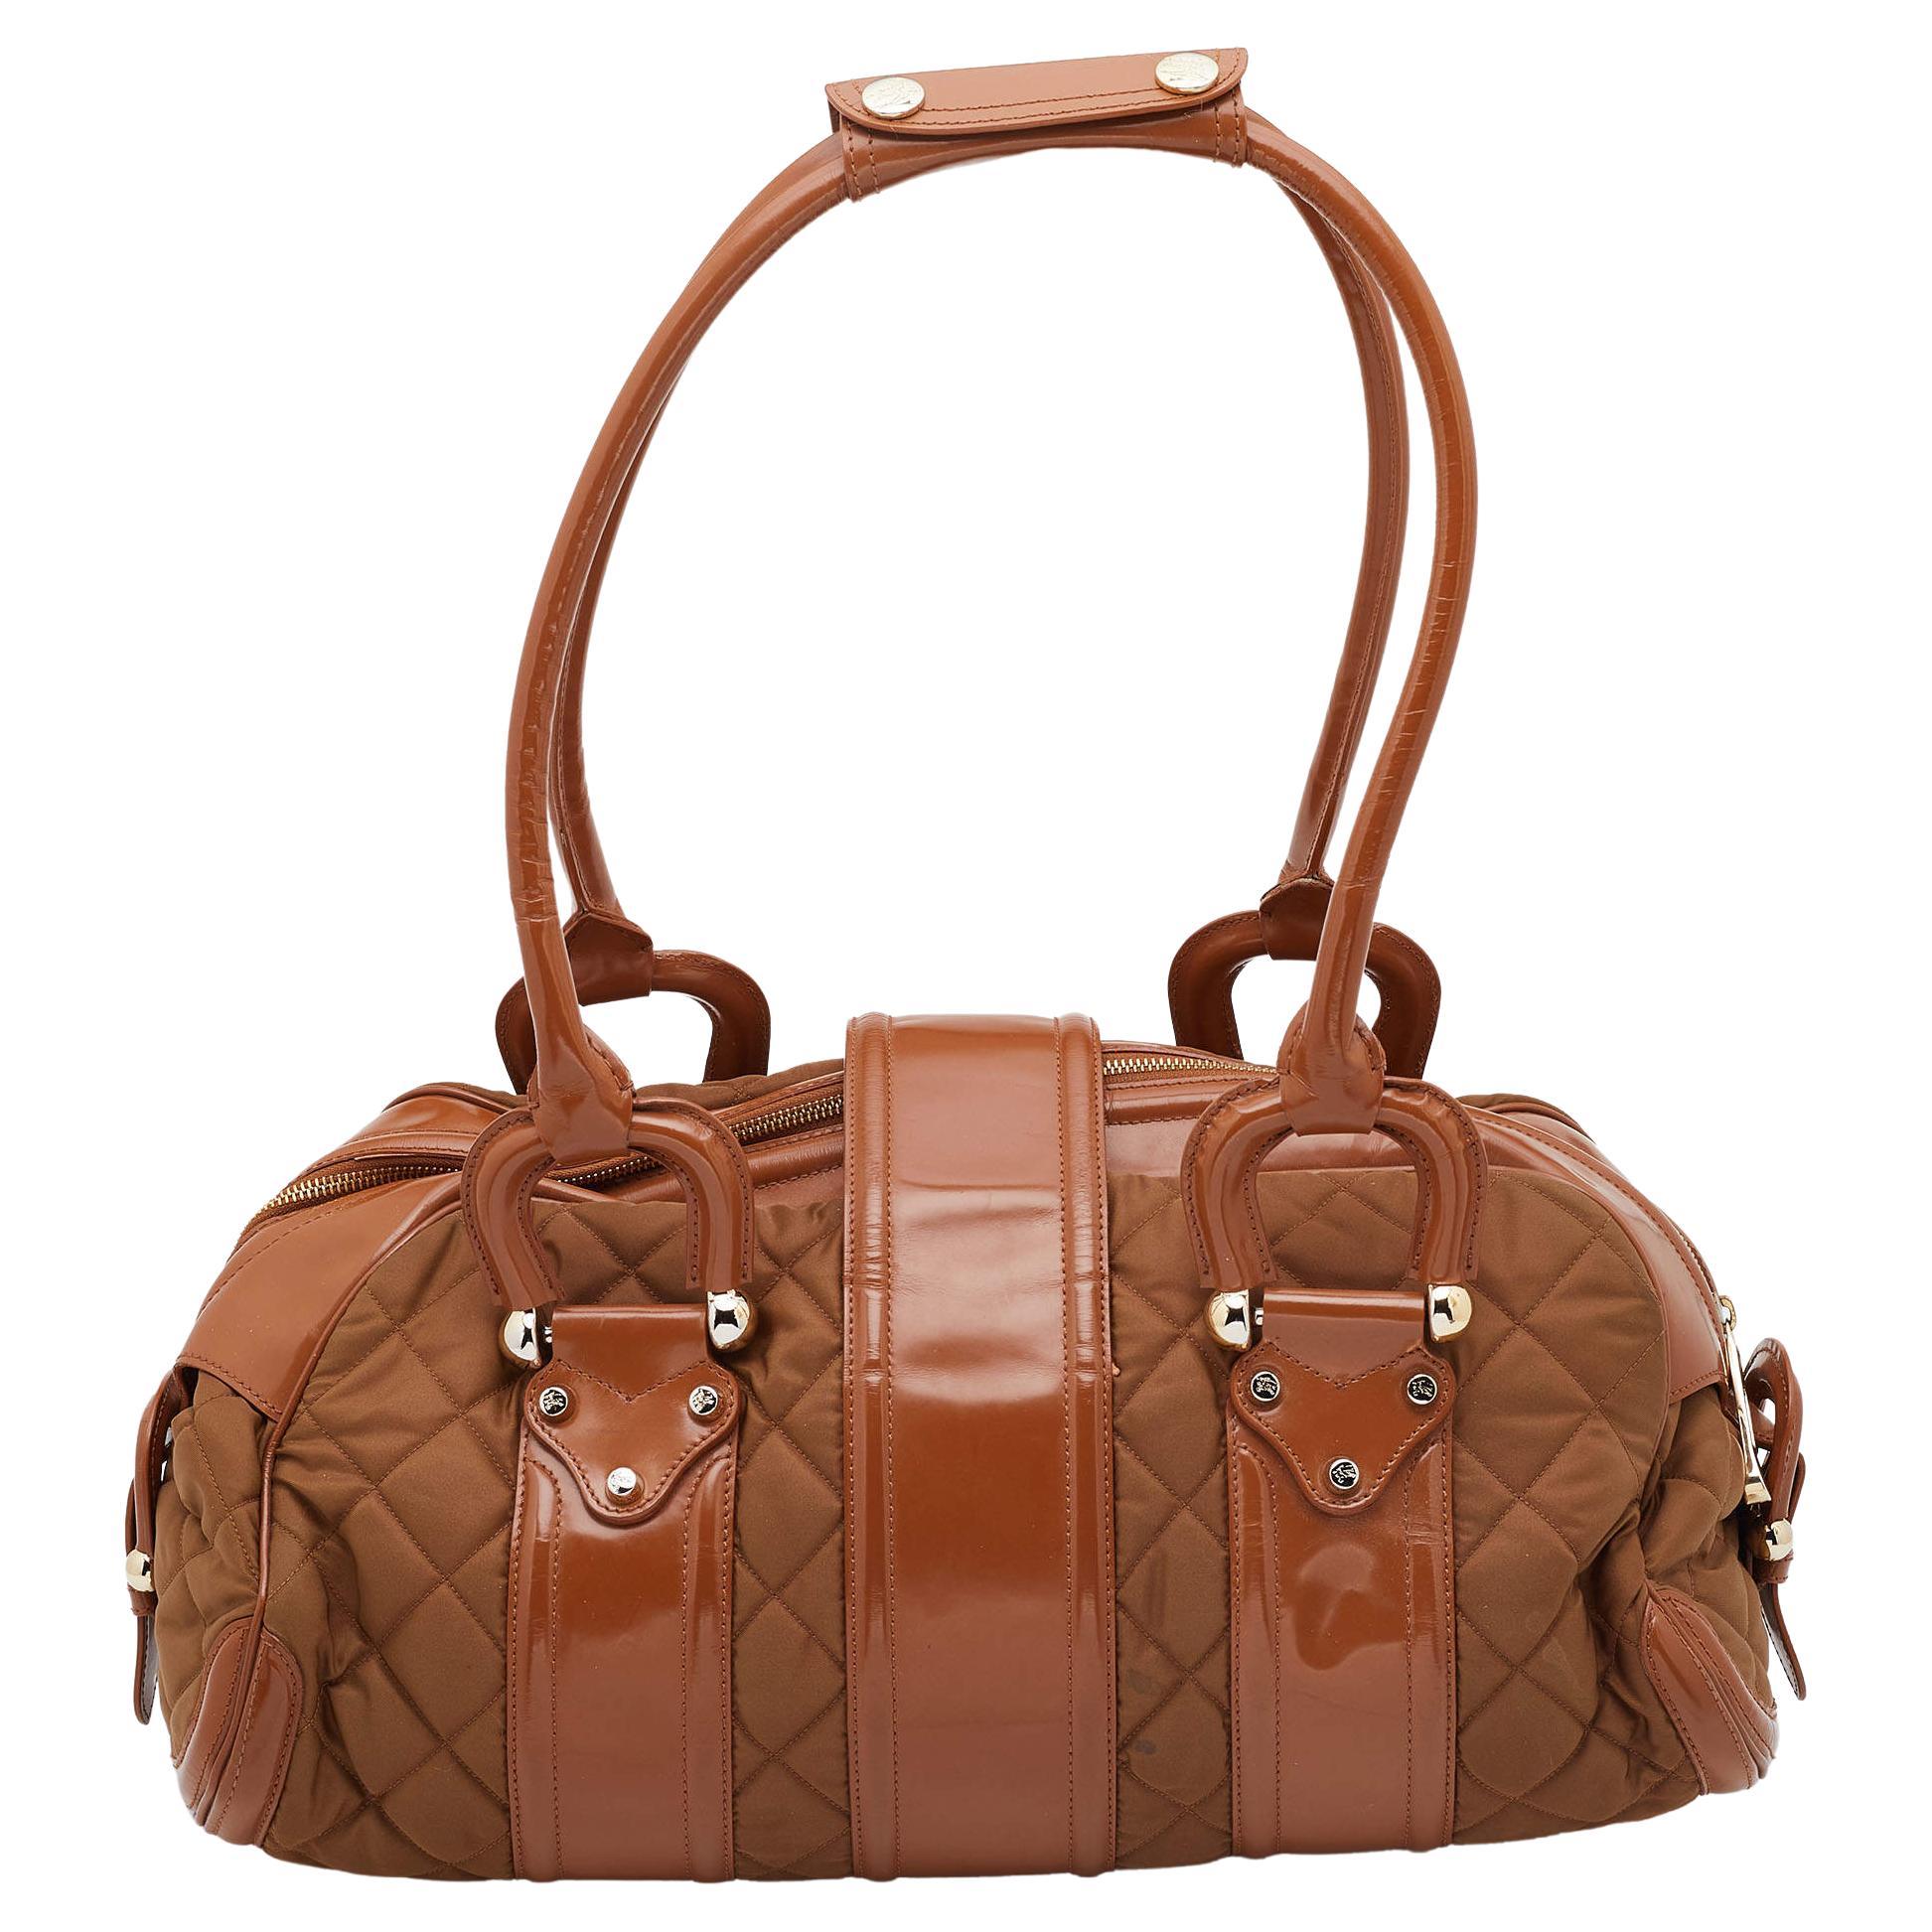 Burberry Brown/Tan Nylon and Leather Large Manor Satchel